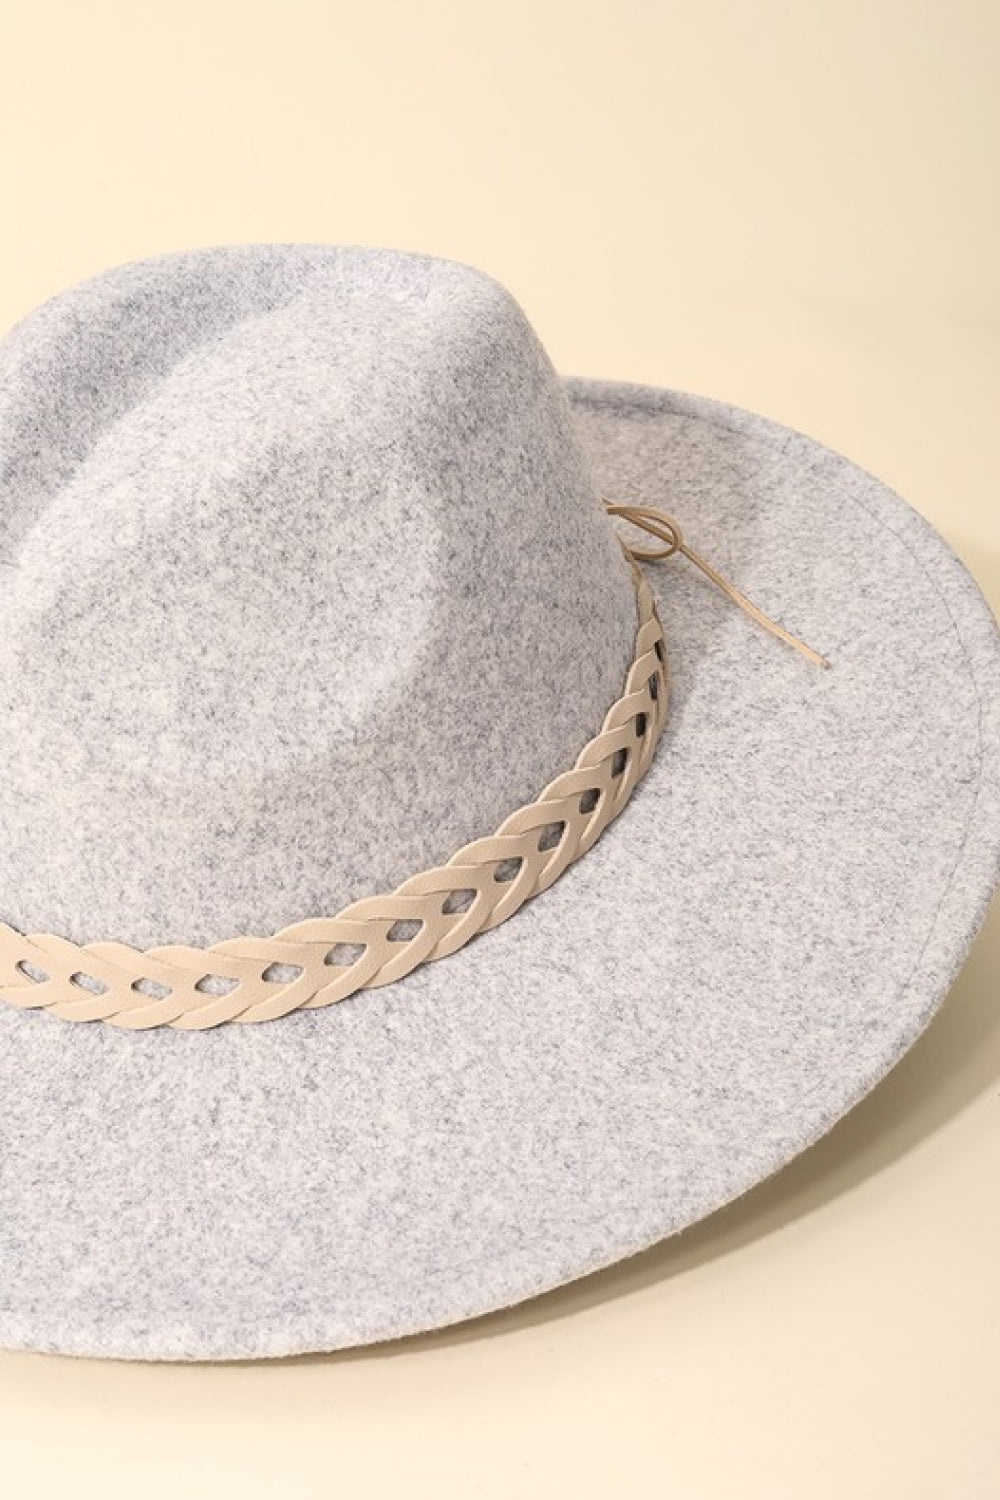 Fame Woven Together Braided Strap Fedora Print on any thing USA/STOD clothes